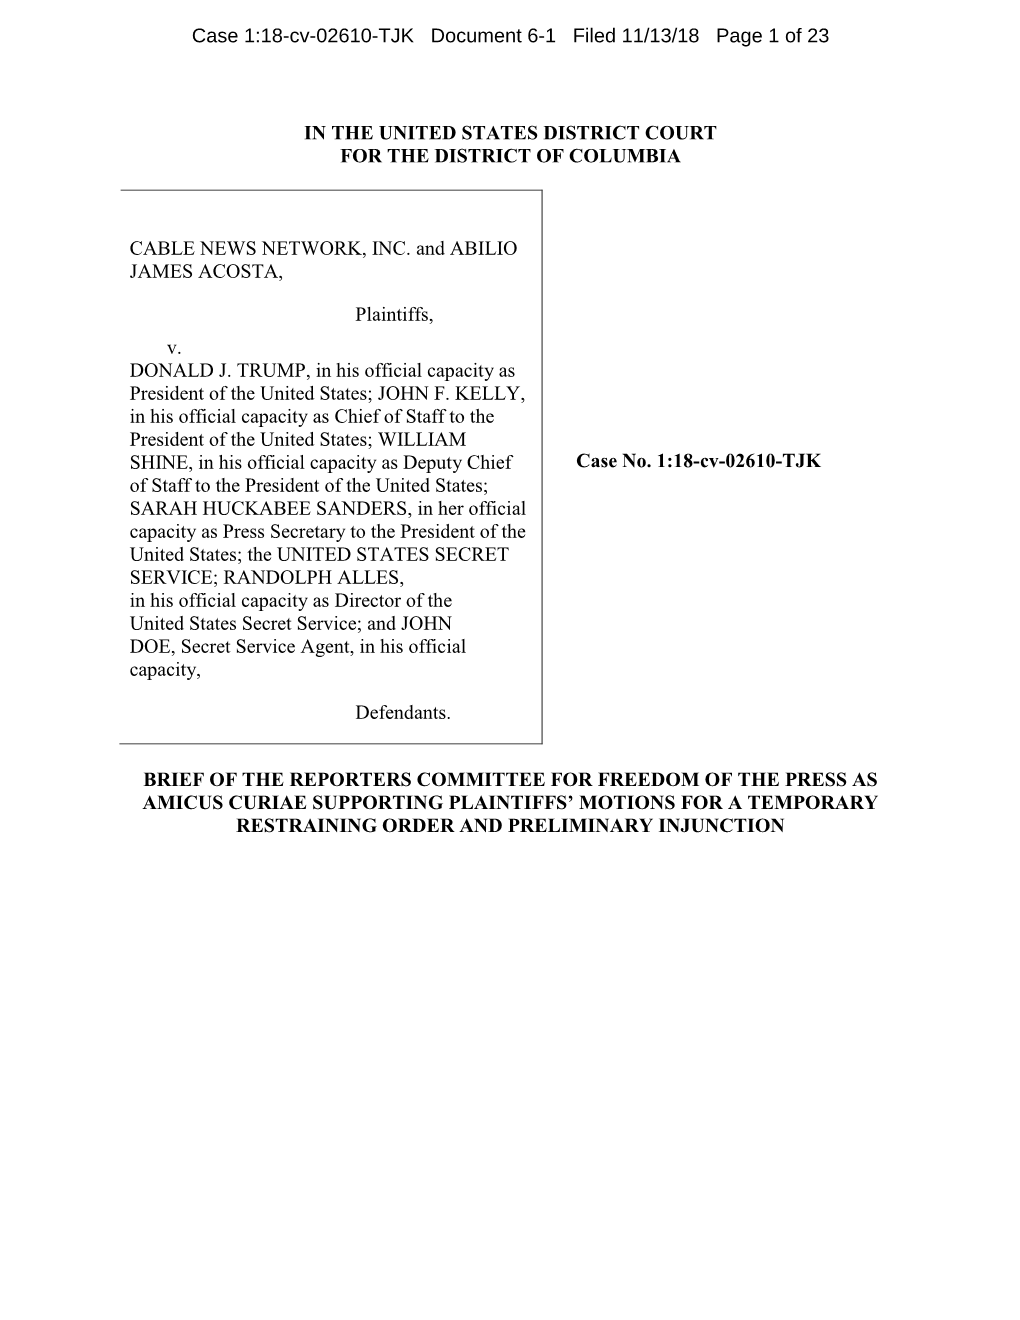 Brief of the Reporters Committee for Freedom of the Press As Amicus